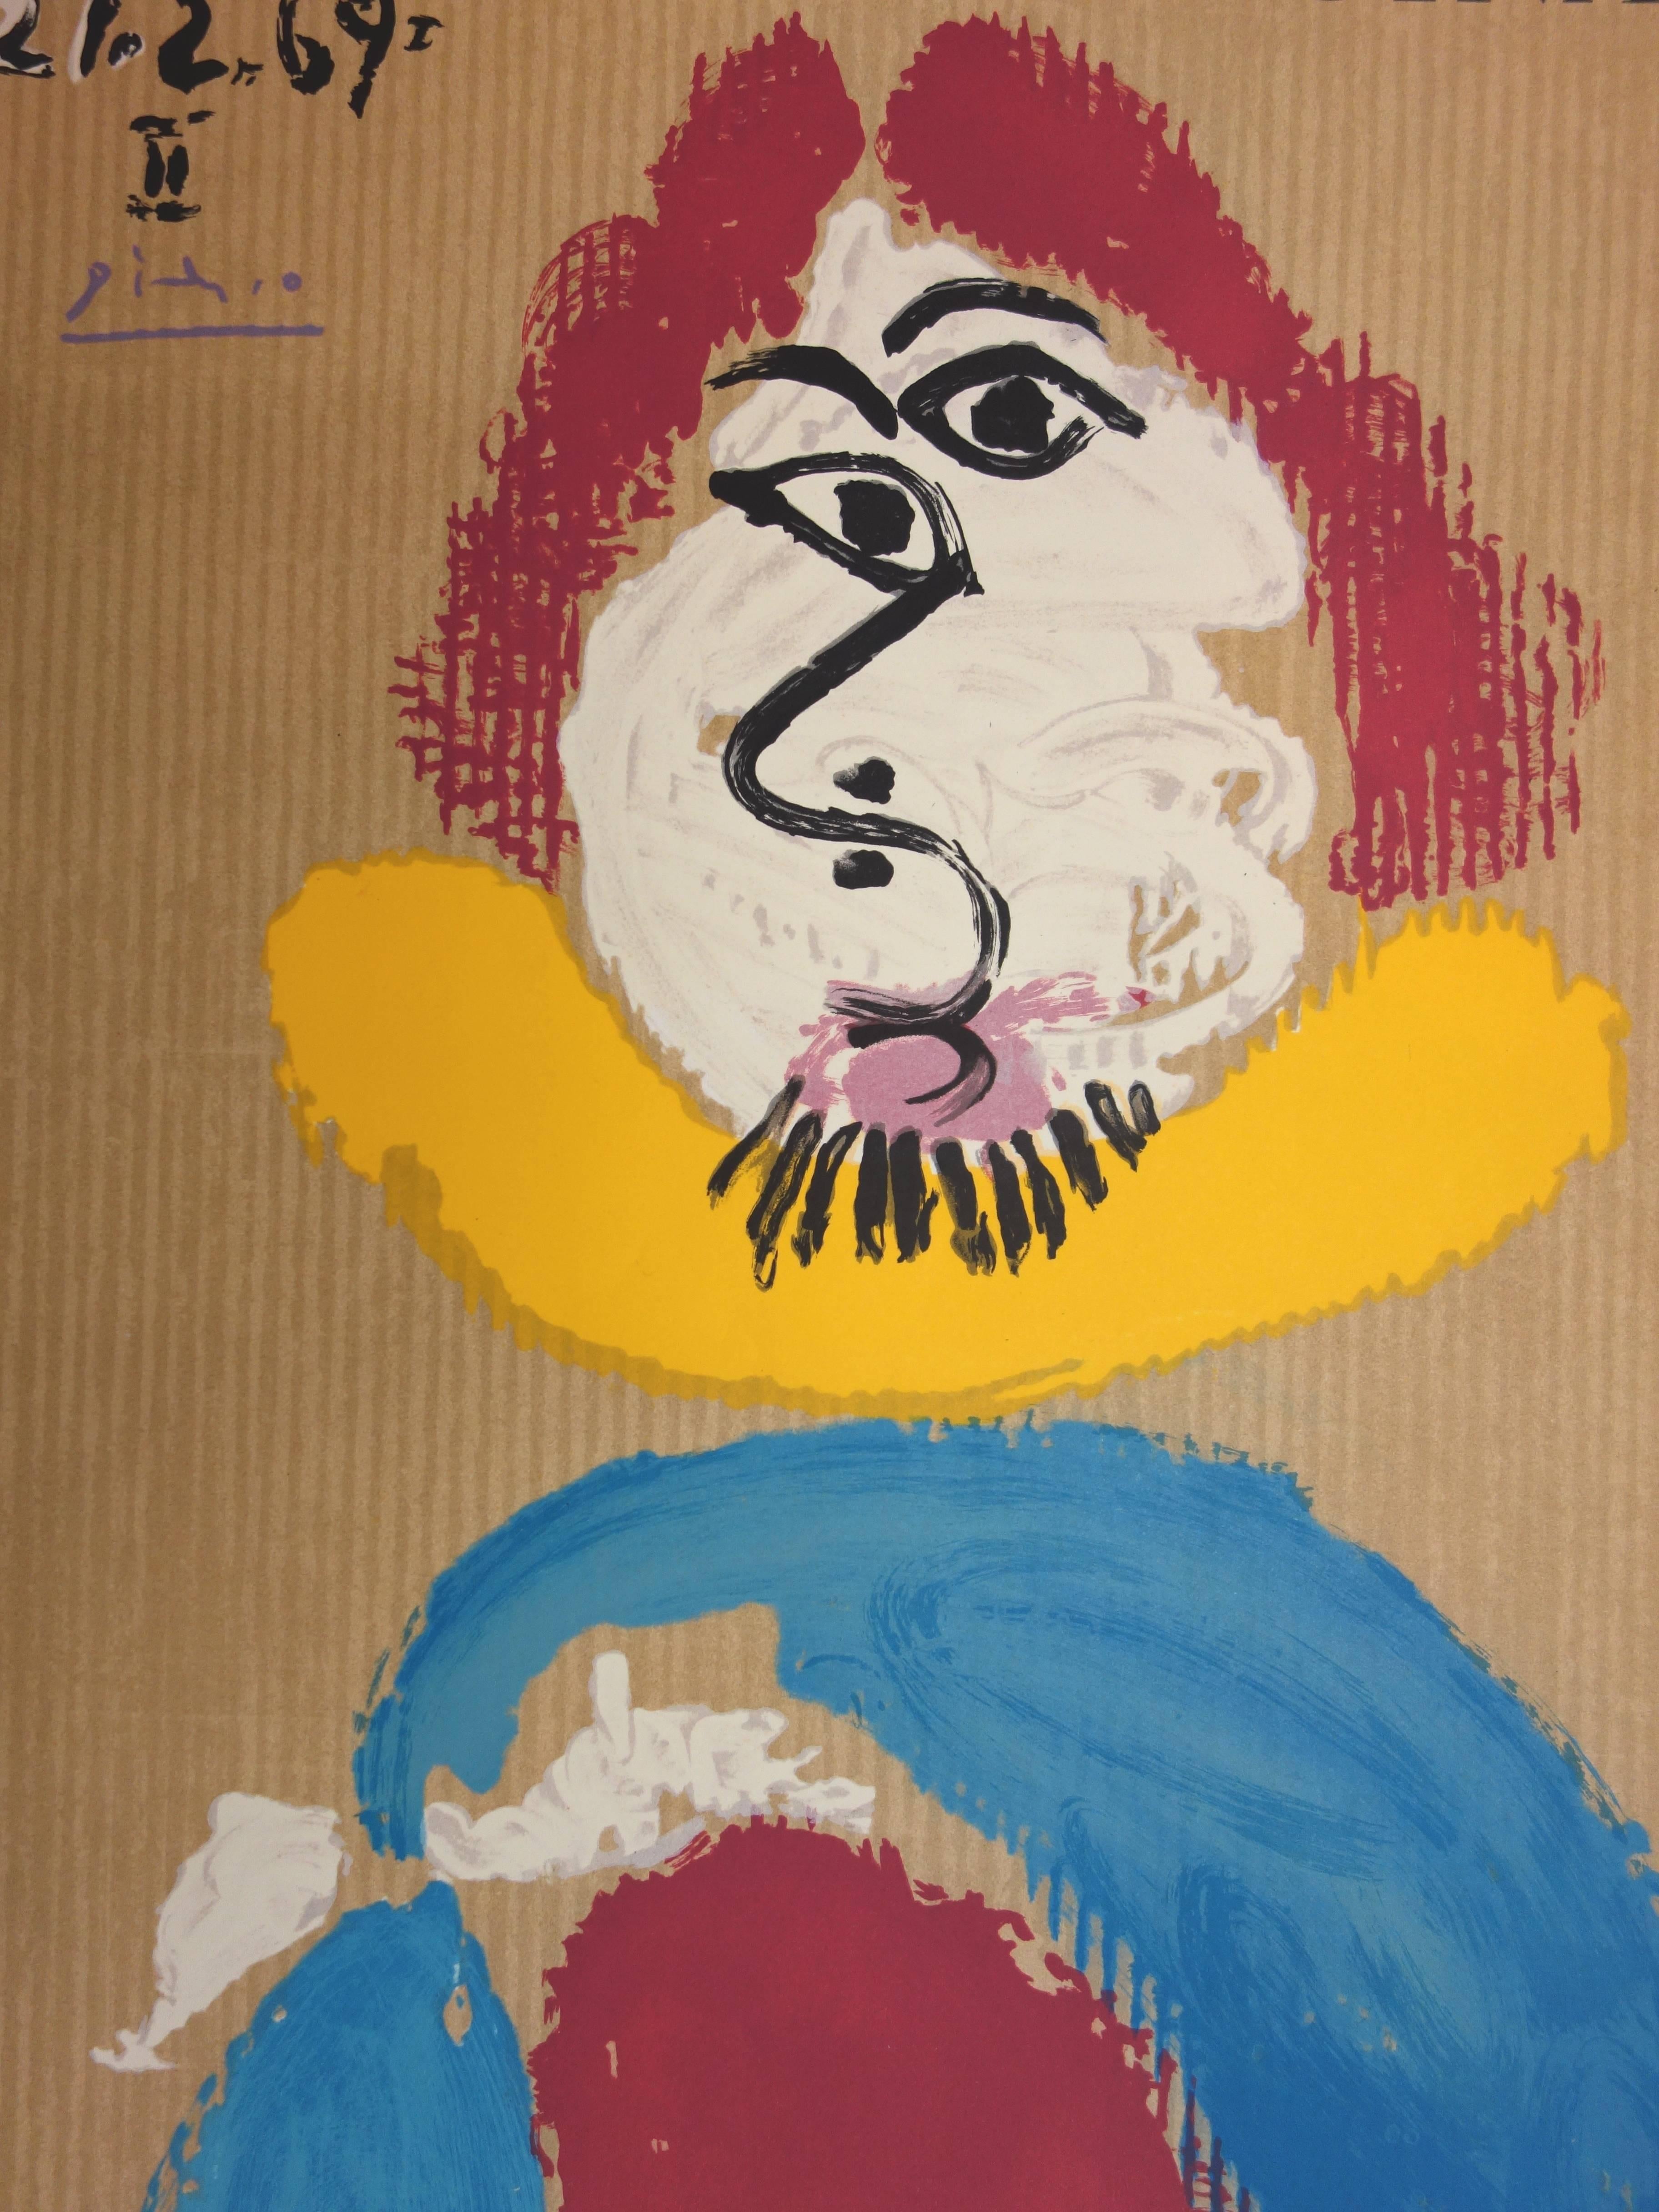 After Pablo Picasso 
Imaginary Portraits : Spanish Man
Poster for an exhibition at Galerie du Passeur, Paris, 13 October - 13 November 1971.

Lithograph
Printed signature in the plate
From a limited edition of  300 copies
On wove paper 74 x 51.5 cm